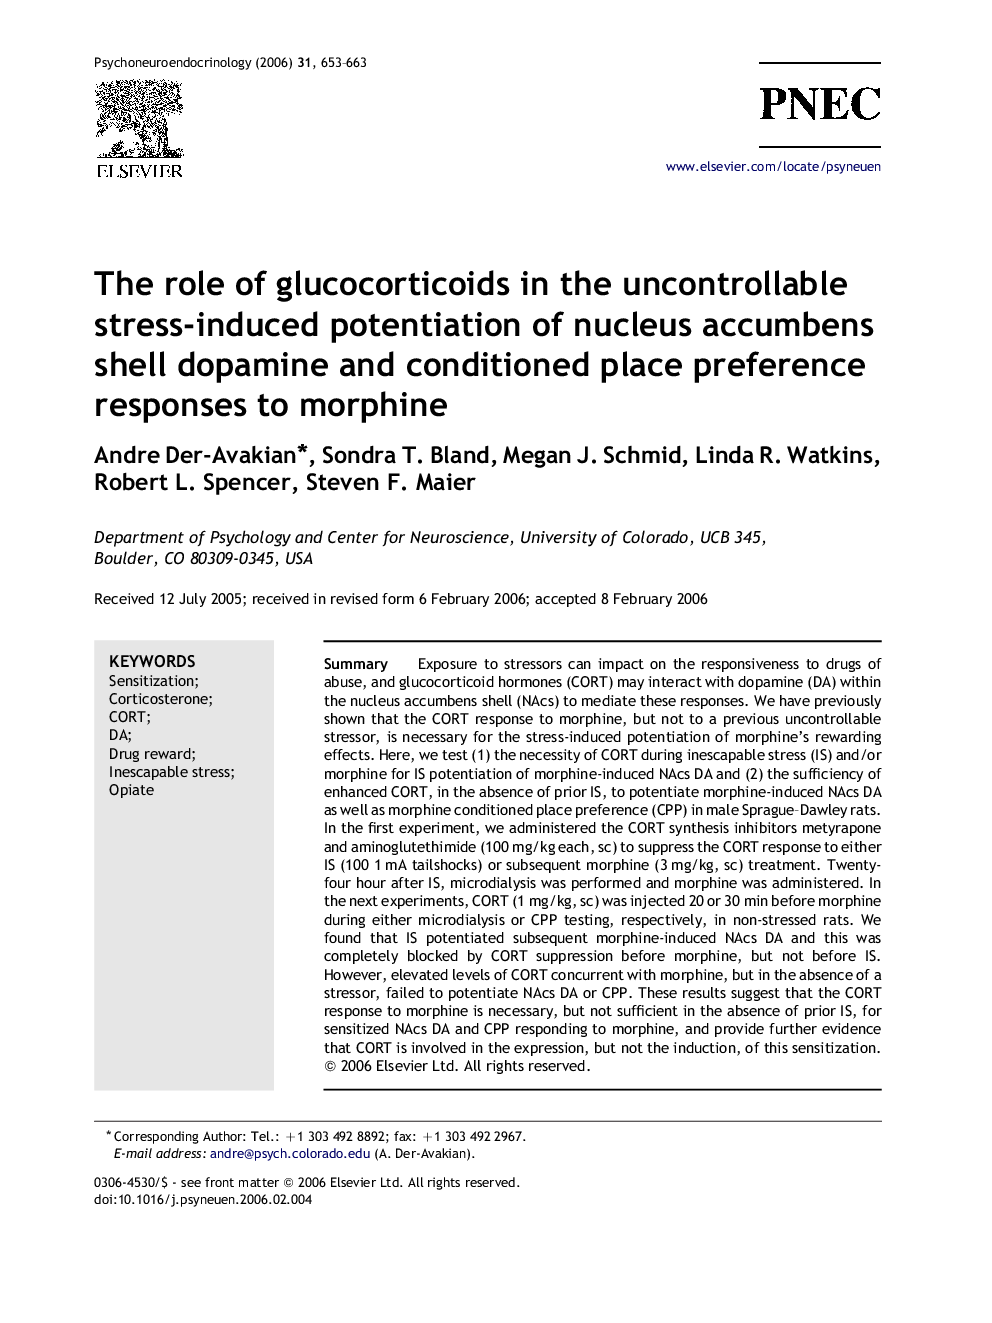 The role of glucocorticoids in the uncontrollable stress-induced potentiation of nucleus accumbens shell dopamine and conditioned place preference responses to morphine